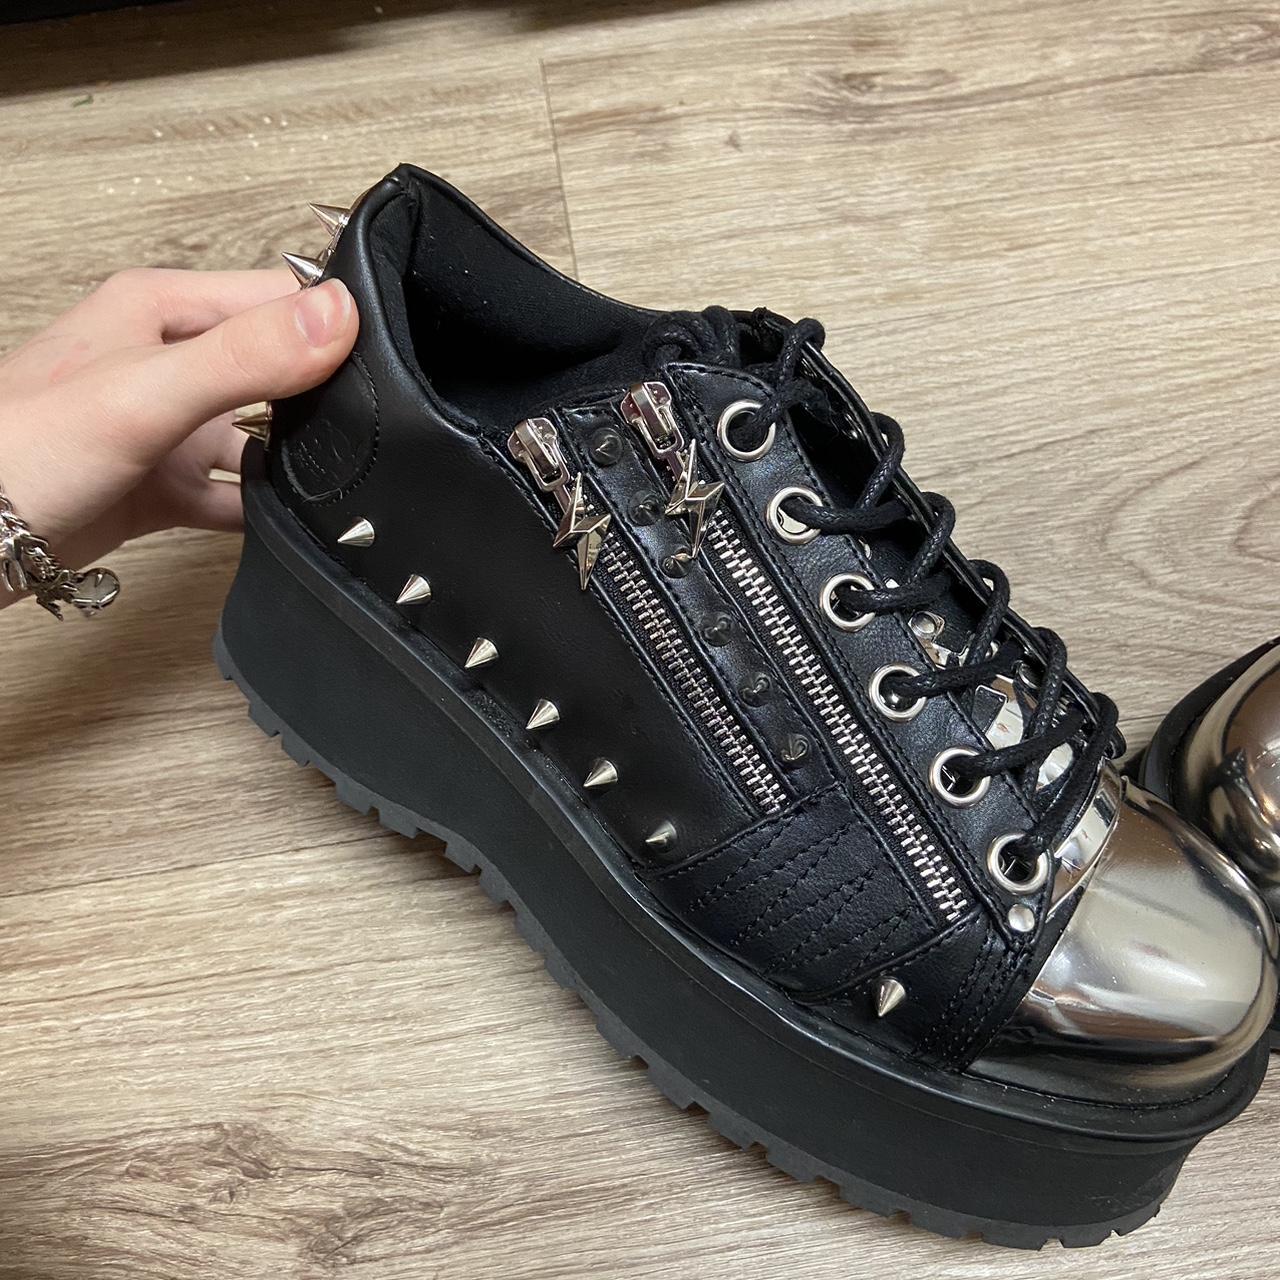 Demonia Men's Black and Silver Boots (4)